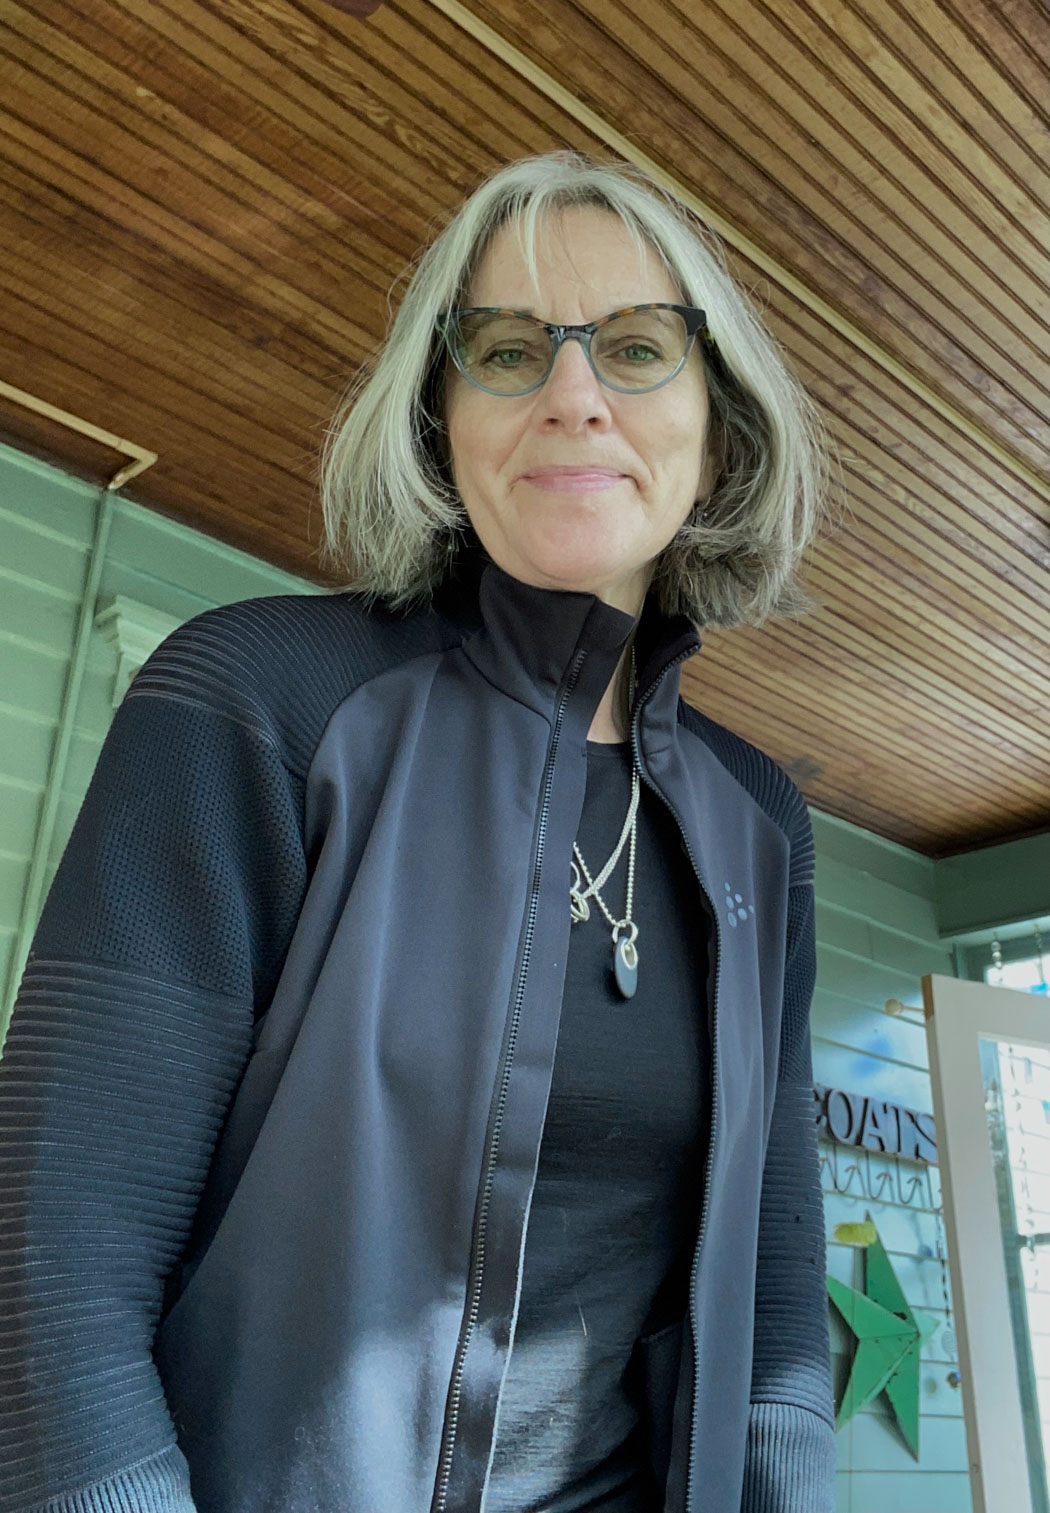 View of a mature lady wearing glasses and a black jacket